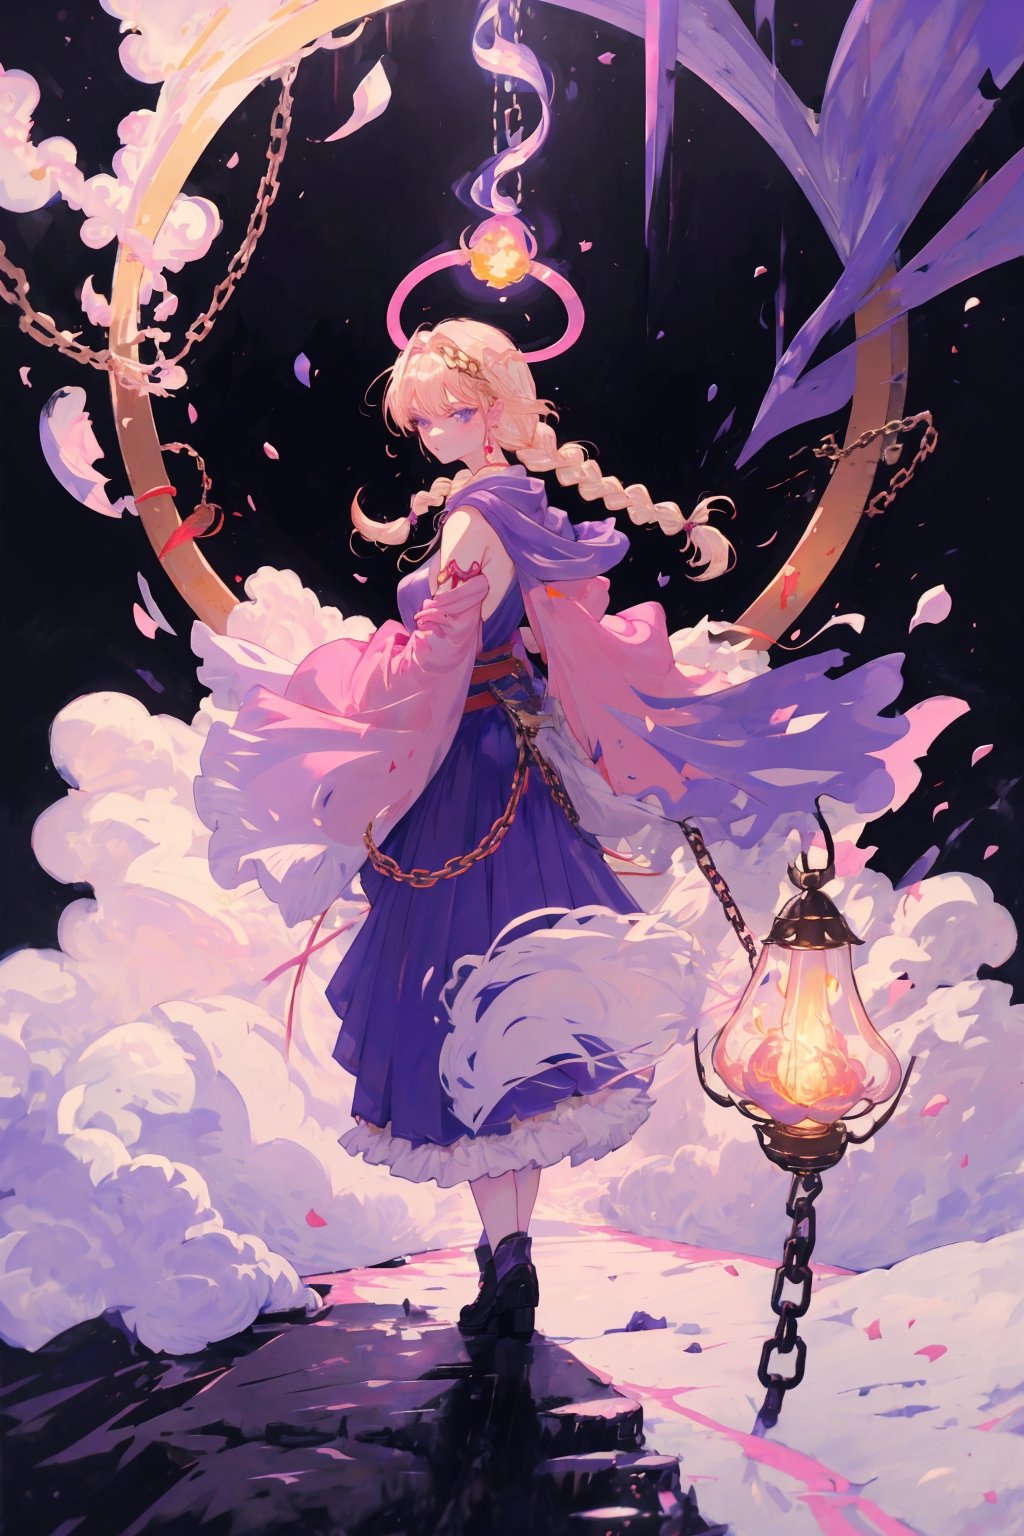 detailed anime style, beautiful and stunning artwork, purple clothes, shimmering shadows, strong colors, candy cotton pastel colors, young girl, tsundere, young elf girl, golden baculum, light blonde straight voluminous hair with braids and accessories, long hair, purple eyes, side leak robes. pink cloth details. magic gadgets, orbs, lamps, poles, lampshade, ornate background with white and pink lights, purple front robes with pink details, side of the body shown, side nudity, arms shown, golden belt, chain details, sorcerer, conjuring magic, by Yoshitaka Amano, CLAMP, Dungeons and Dragons, acrylic art, pastel colors, sideboob, holding a magic fireball, fireball, magic, side-open long skirt,ink,fantasy00d,monochrome,amano yoshitaka